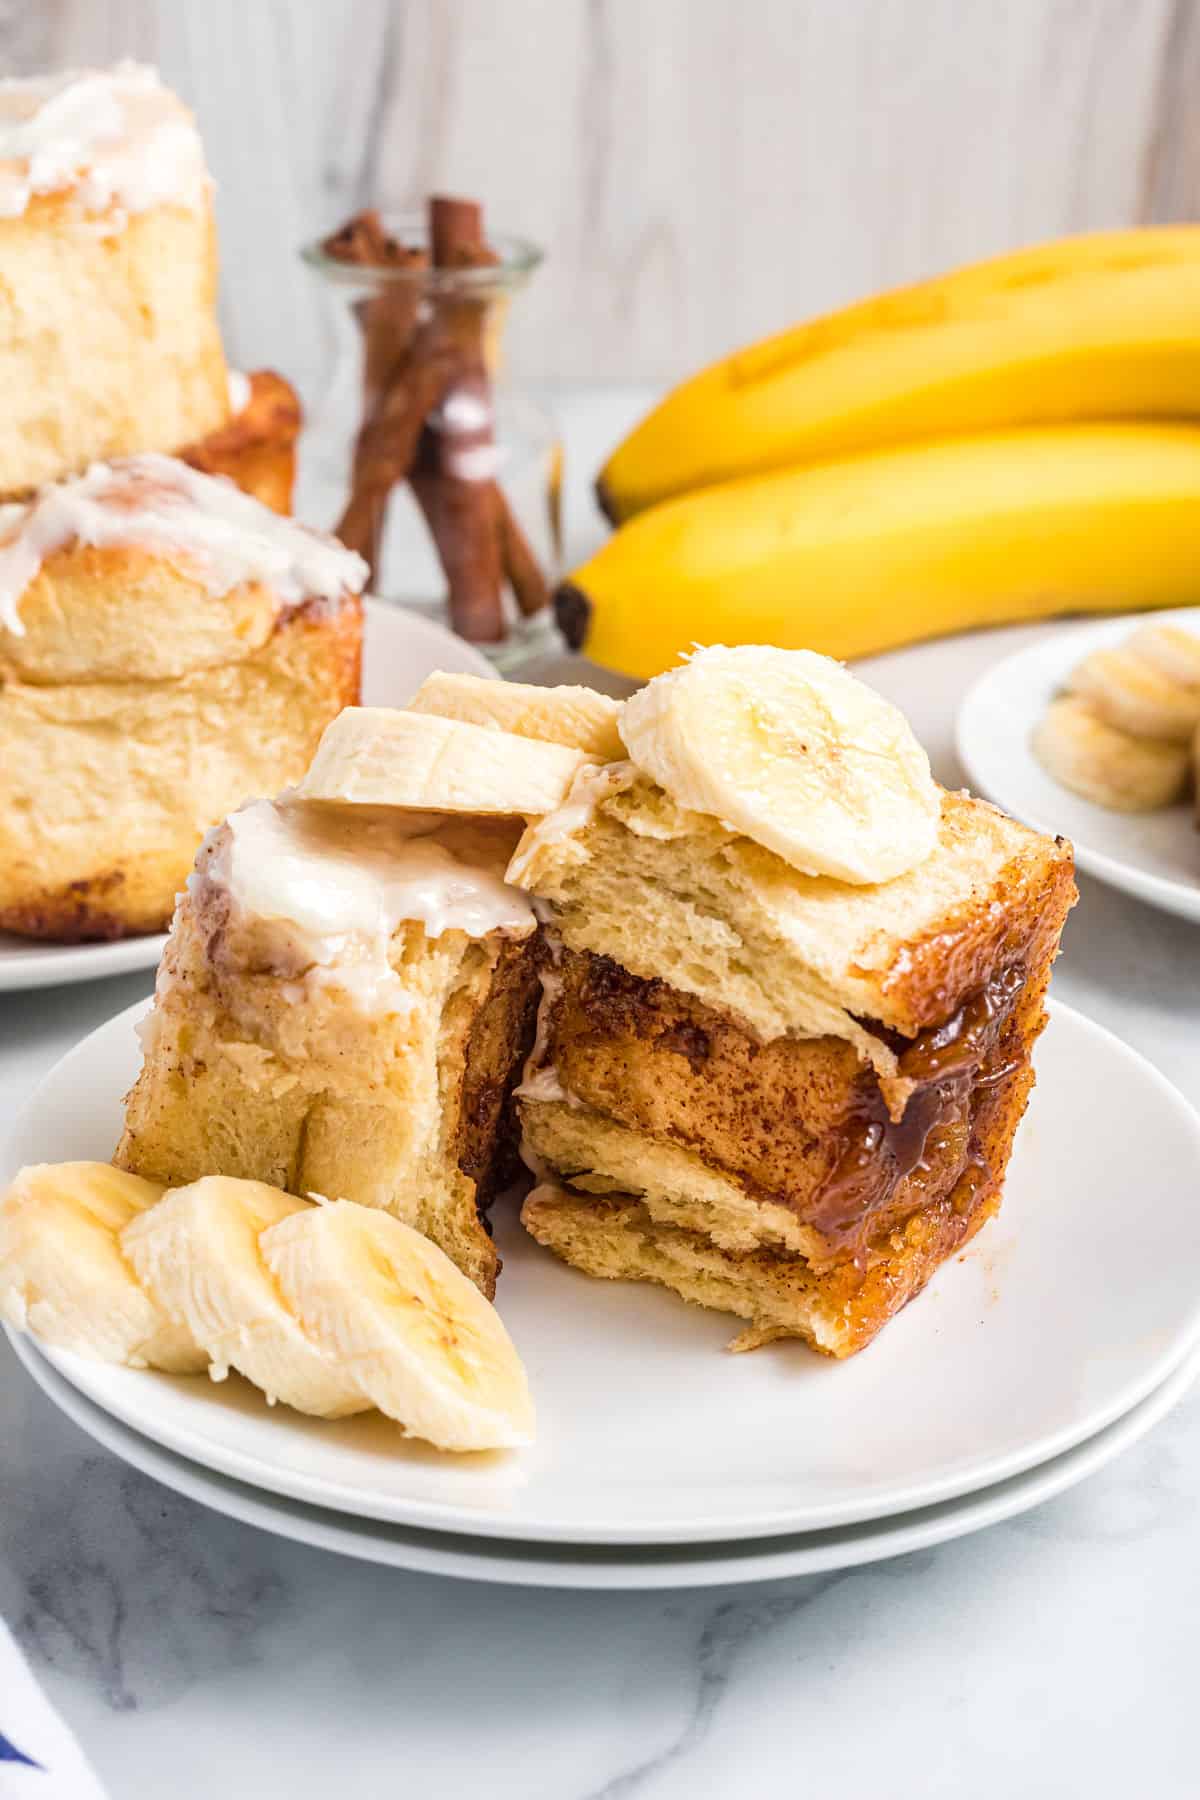 Banana slices are placed on top of and around a cinnamon roll on a white plate.